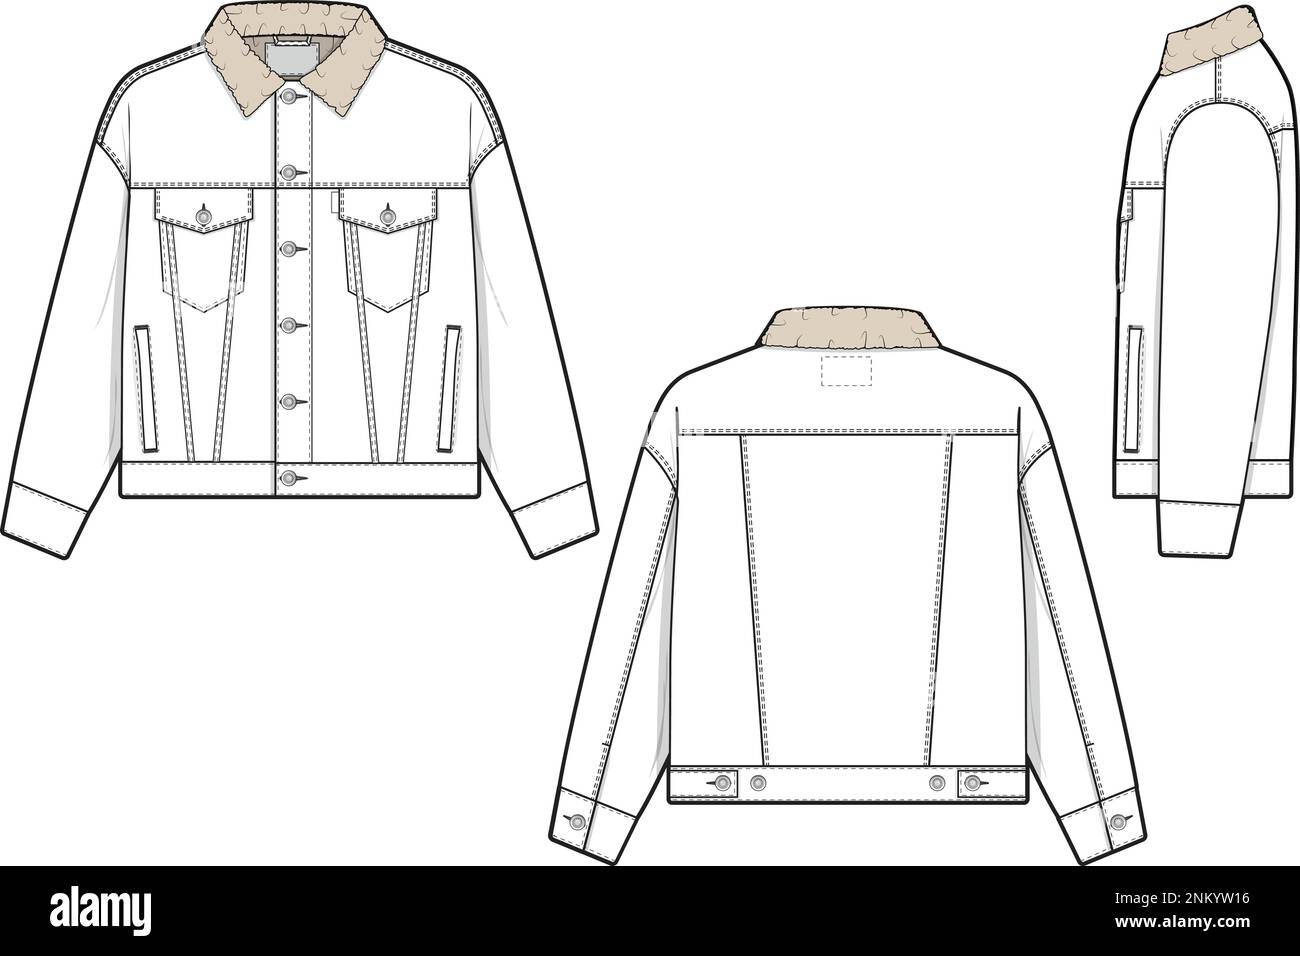 Unisex Men Sherpa denim jacket trucker vector flat technical drawing illustration mock-up template for design and tech packs fashion CAD streetwear Stock Vector